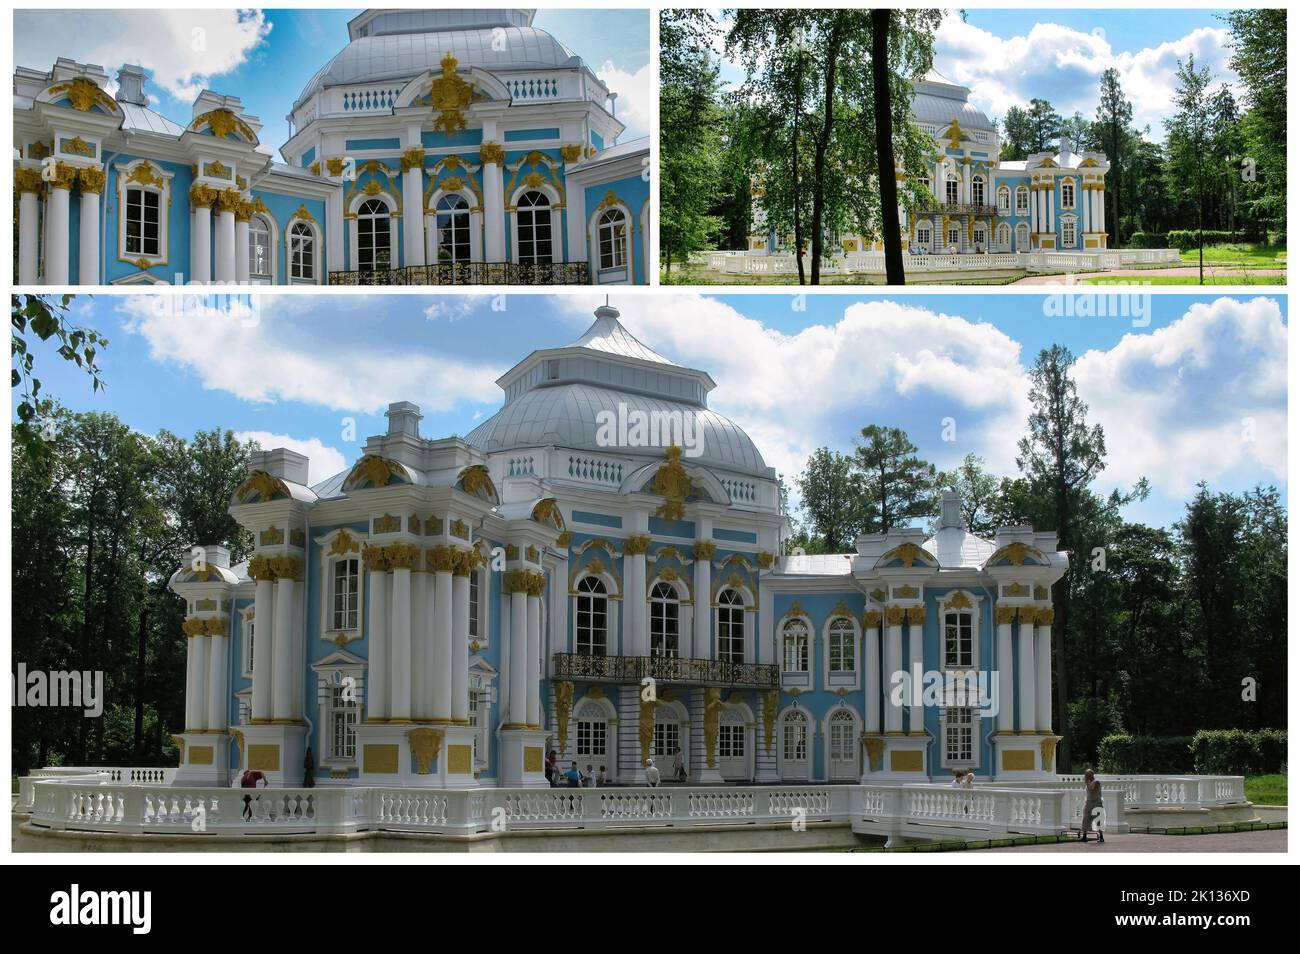 The Grotto Pavilion in the park surrounding Catherine Palace, located in the town of Tsarskoye Selo (Pushkin), St. Petersburg, Russia Stock Photo